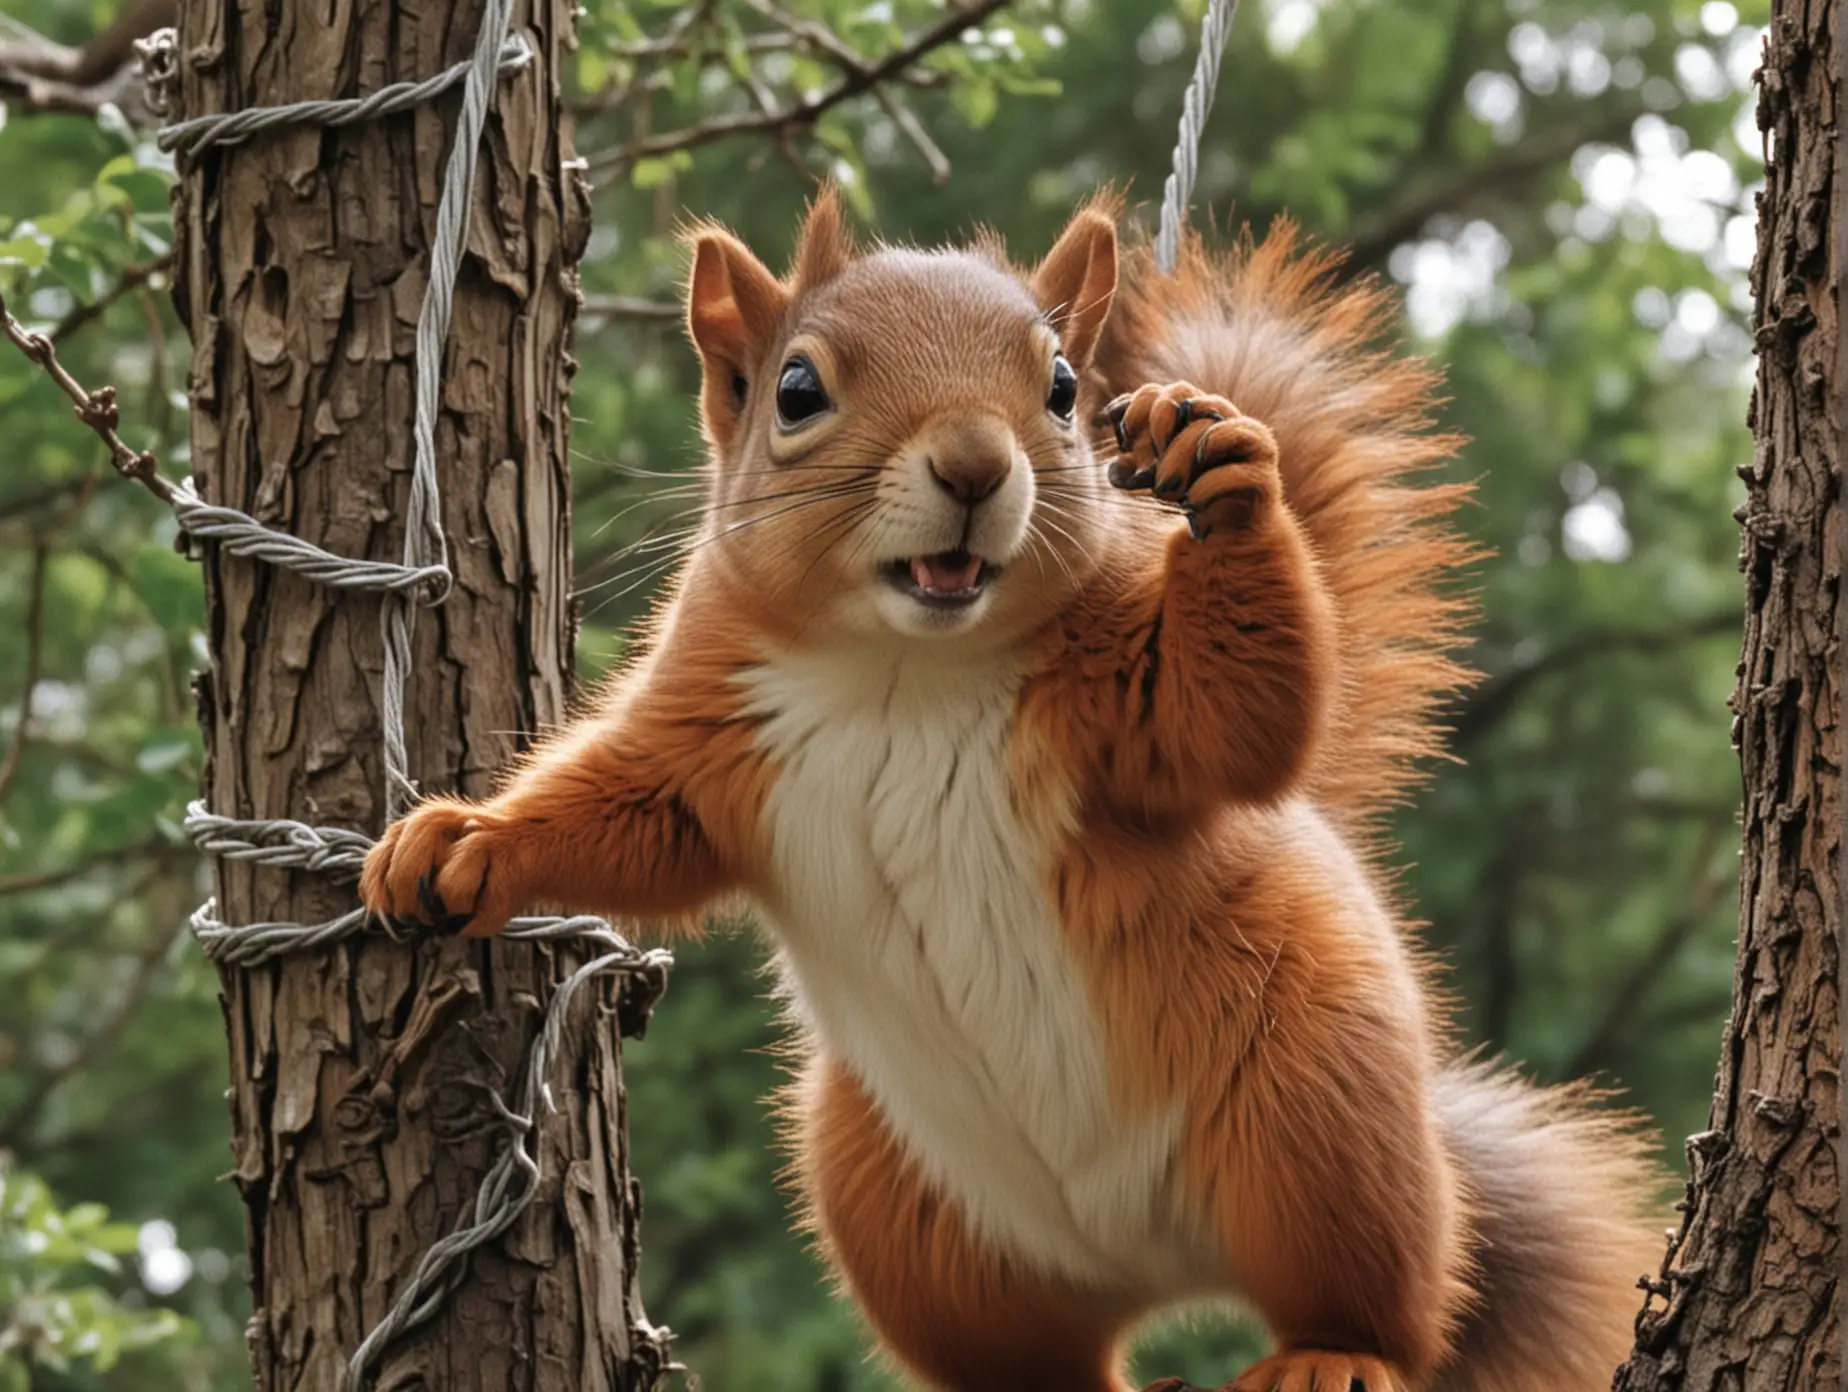 SciFi Squirrel Swinging on a Vine with Human Mannerisms